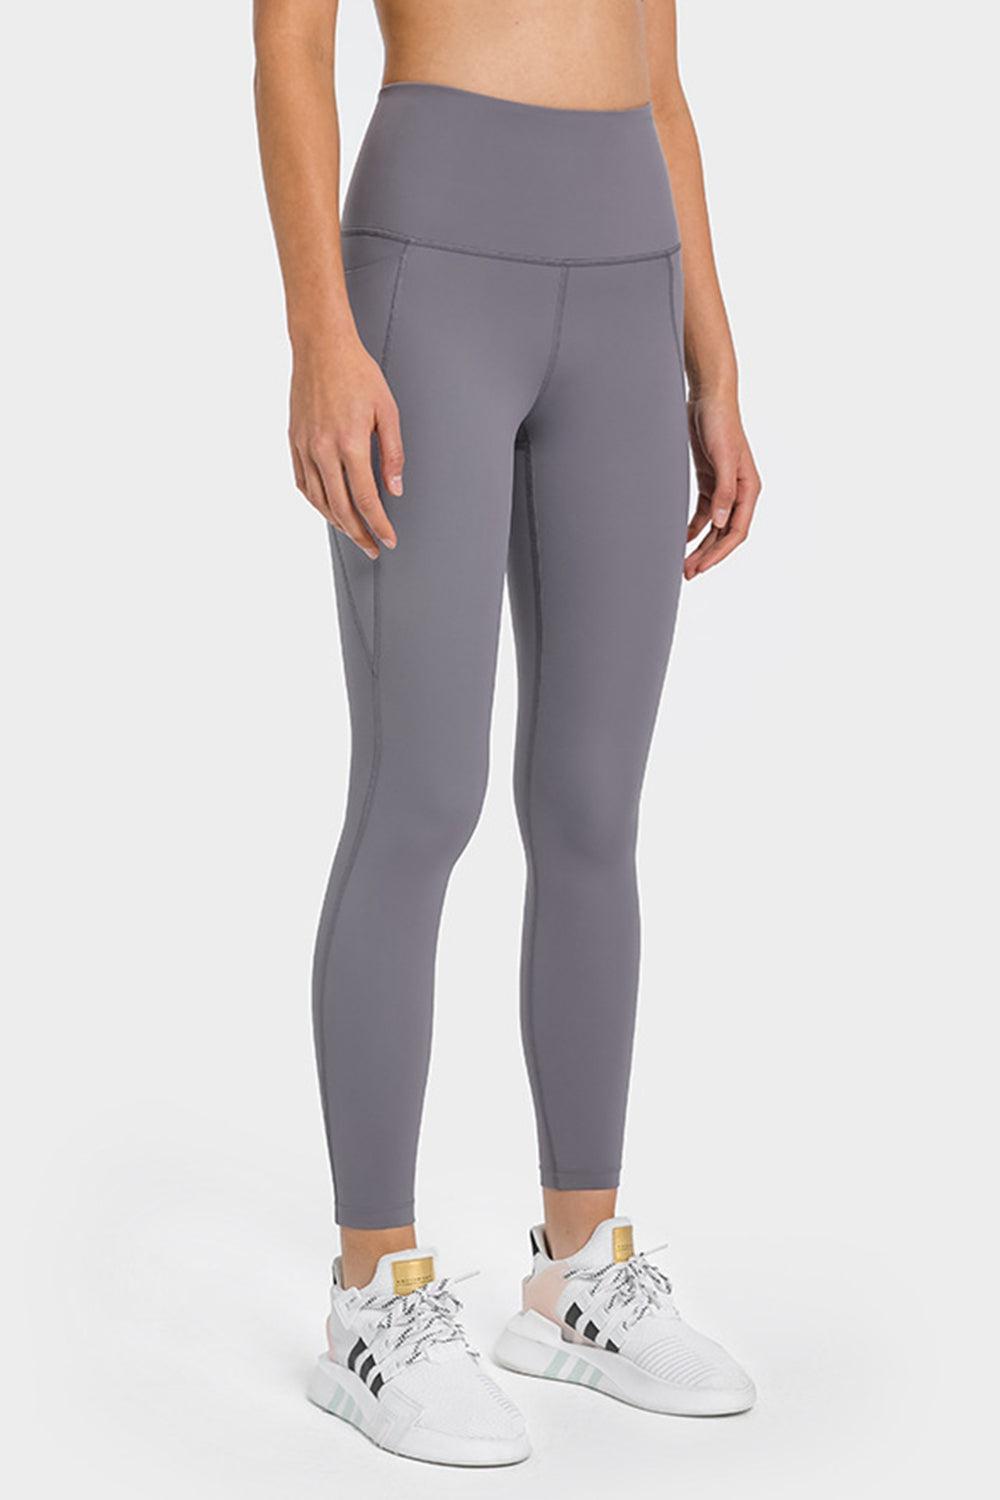 High Waist Ankle-Length Yoga Leggings with Pockets-TOPS / DRESSES-[Adult]-[Female]-Gray-4-Blue Zone Planet